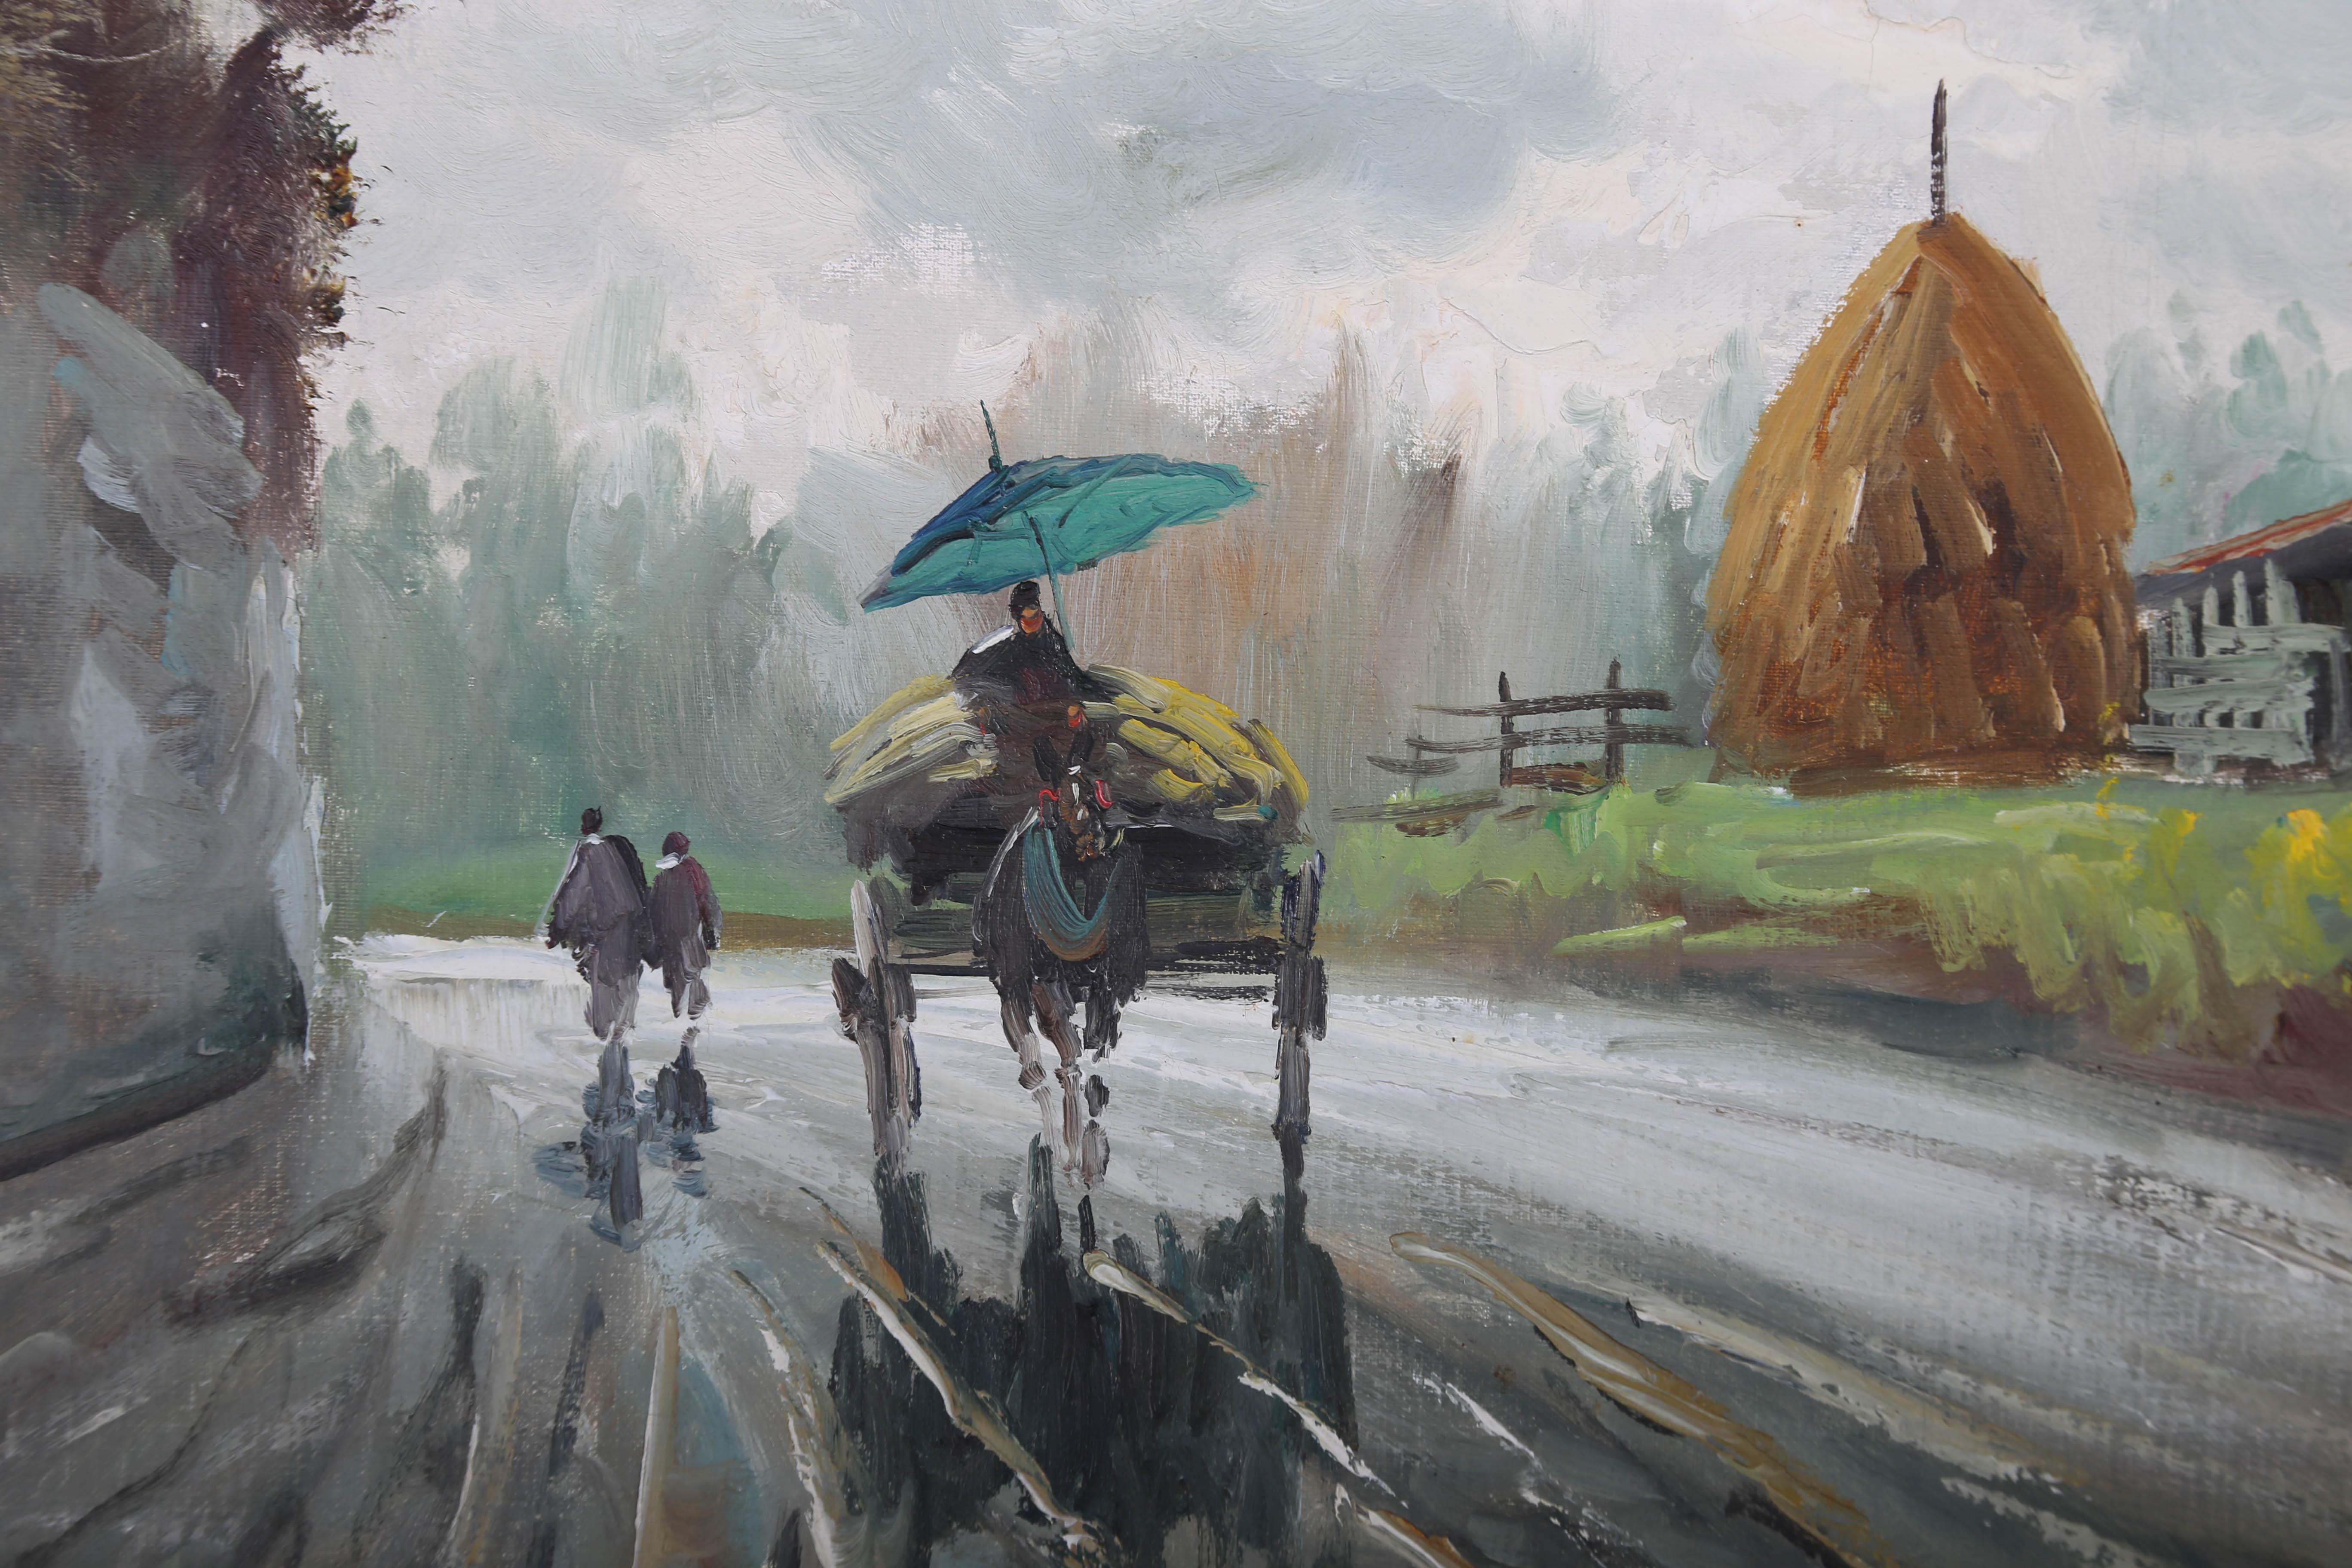 This charming continental scene depicts people travelling down a country road on a rainy day. The artist captures the light reflecting from the wet road surface with an expert hand in a post-impressionist style. His expressive, gestural brushwork